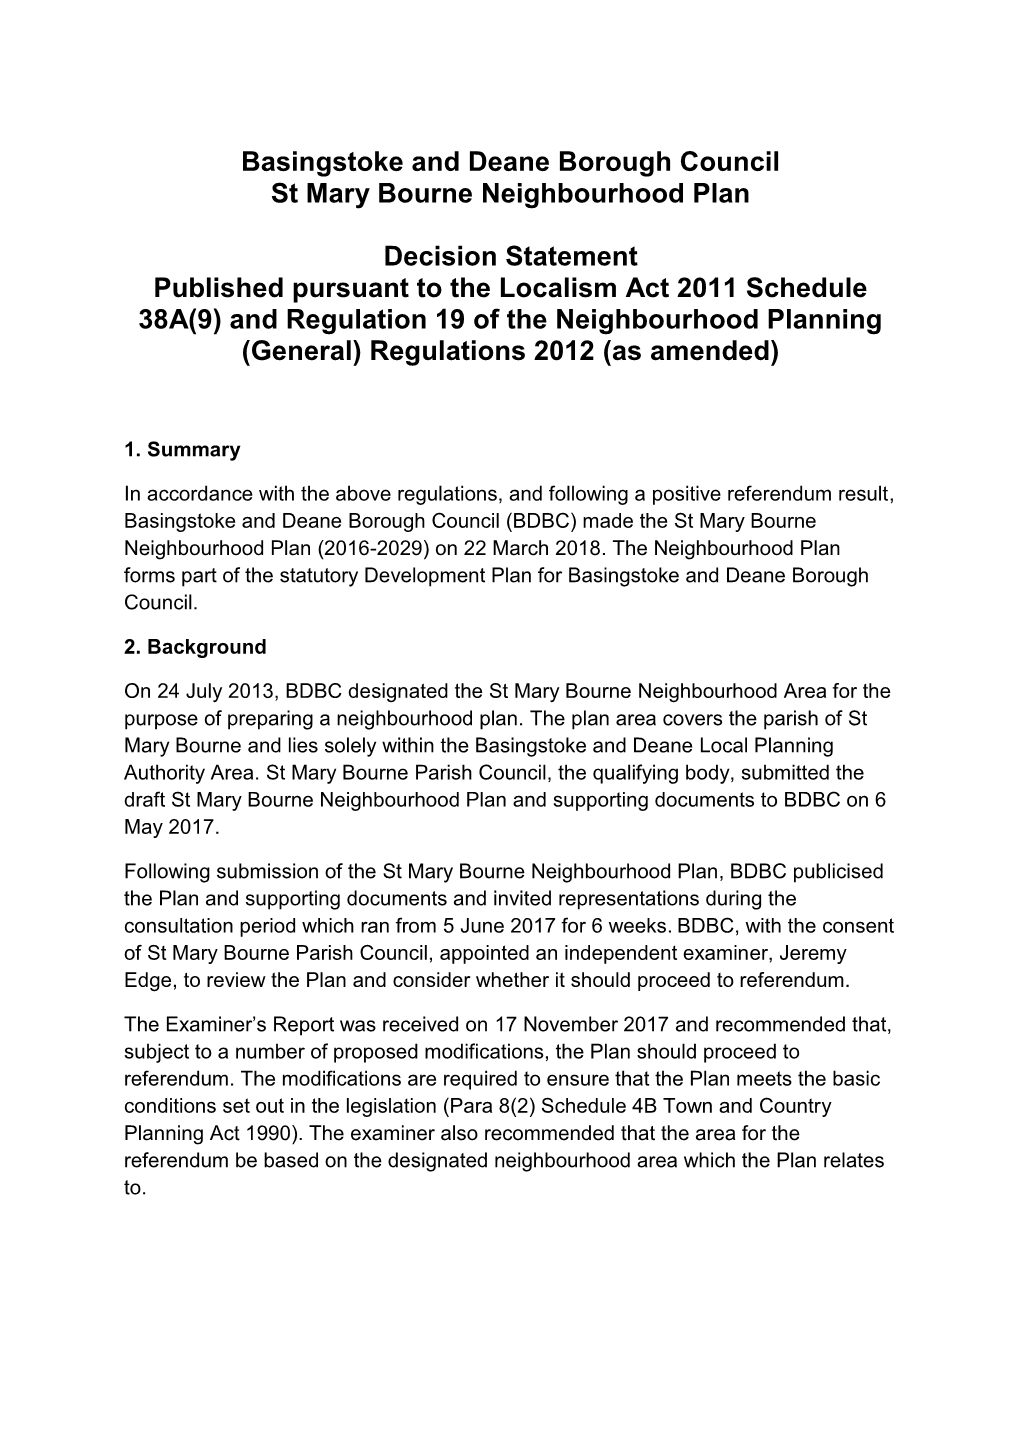 St Mary Bourne Decision Statement